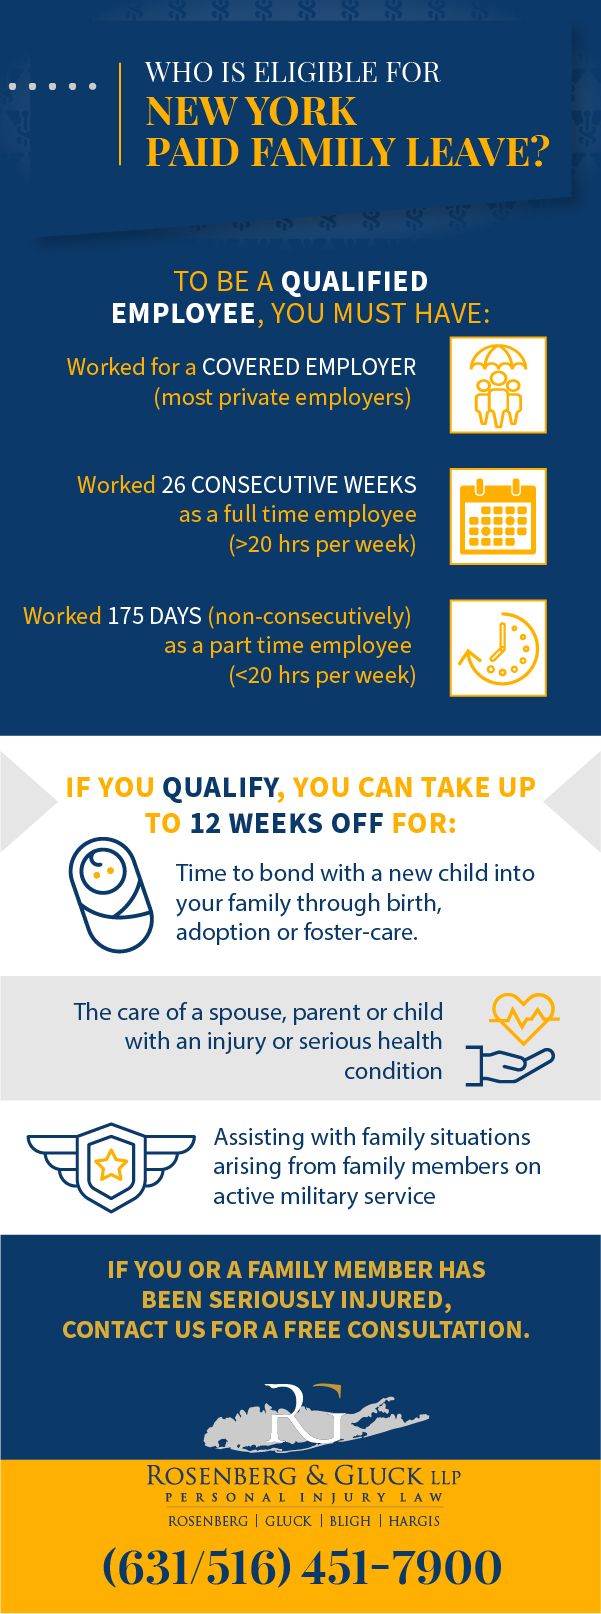 Who Is Eligible for New York Paid Family Leave Infographic